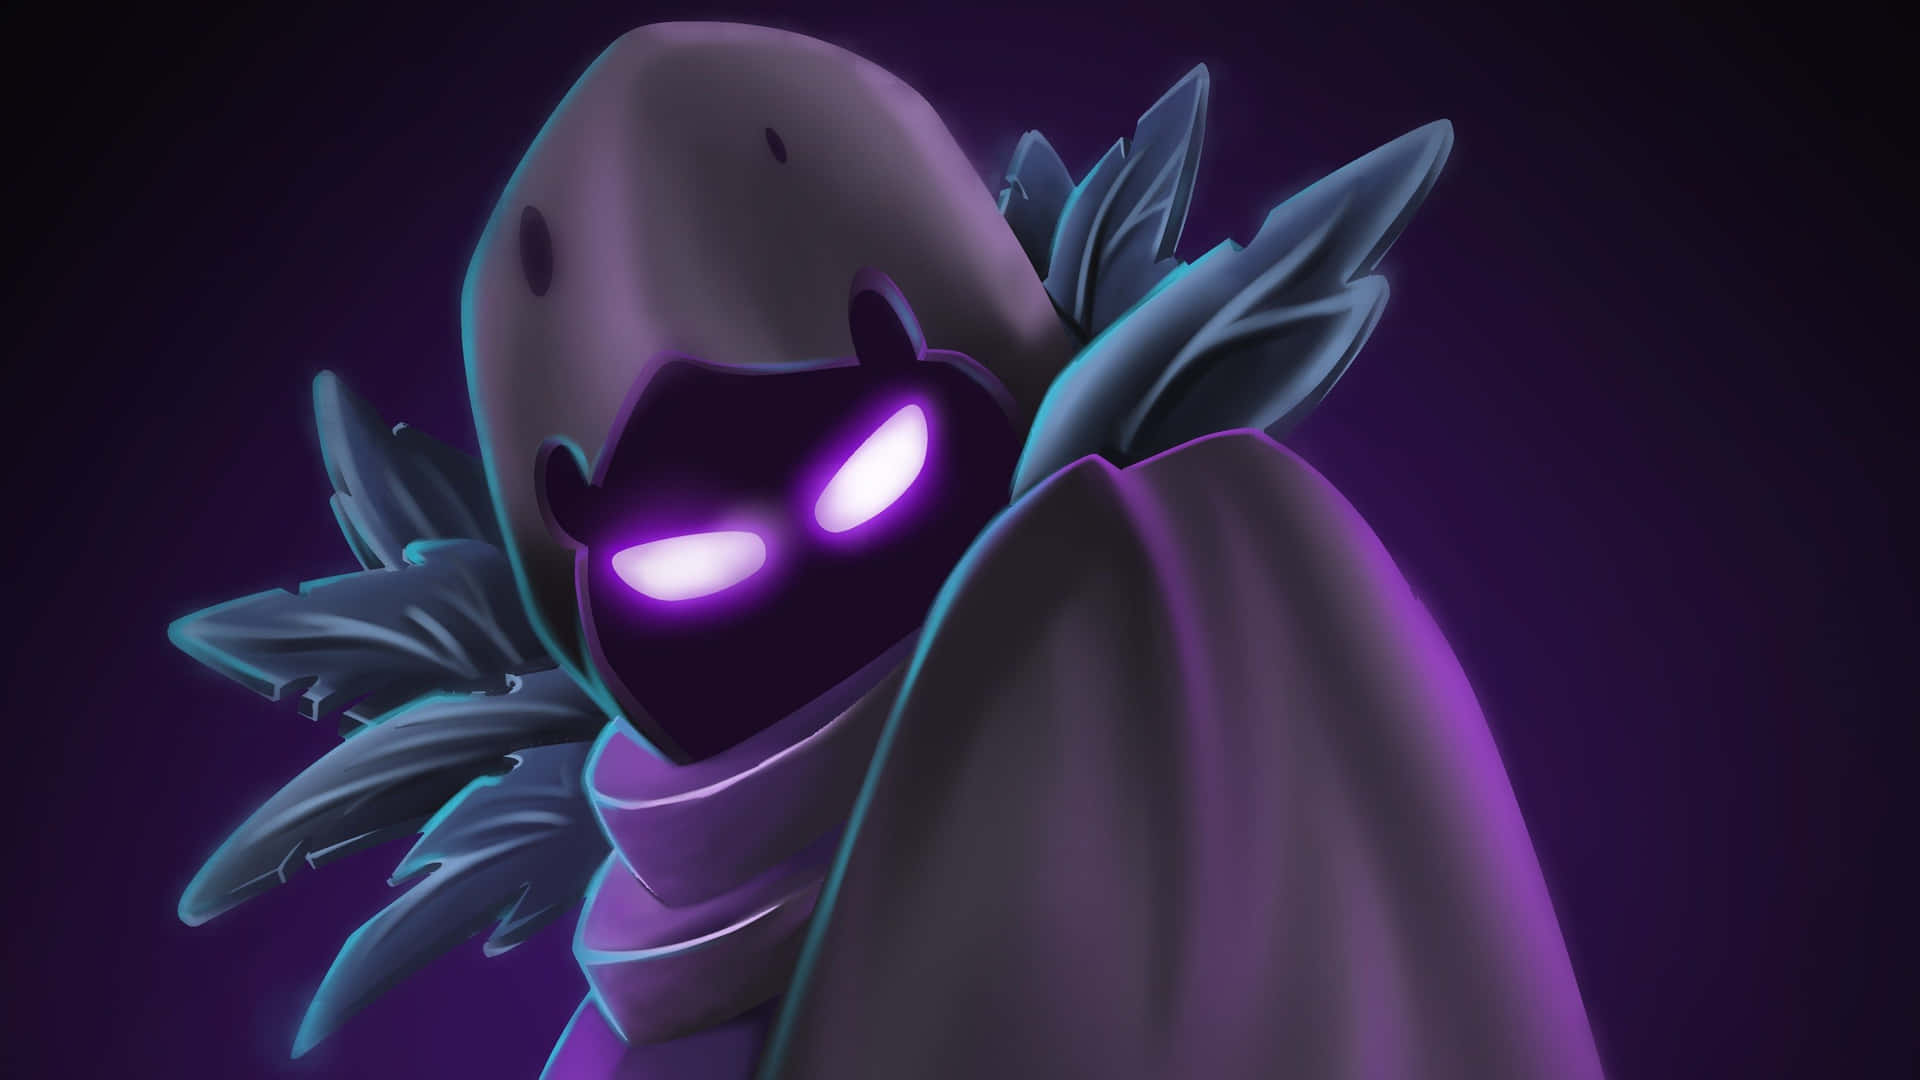 Get the Raven skin in Fortnite Battle Royale and look as stylish and intense as ever. Wallpaper